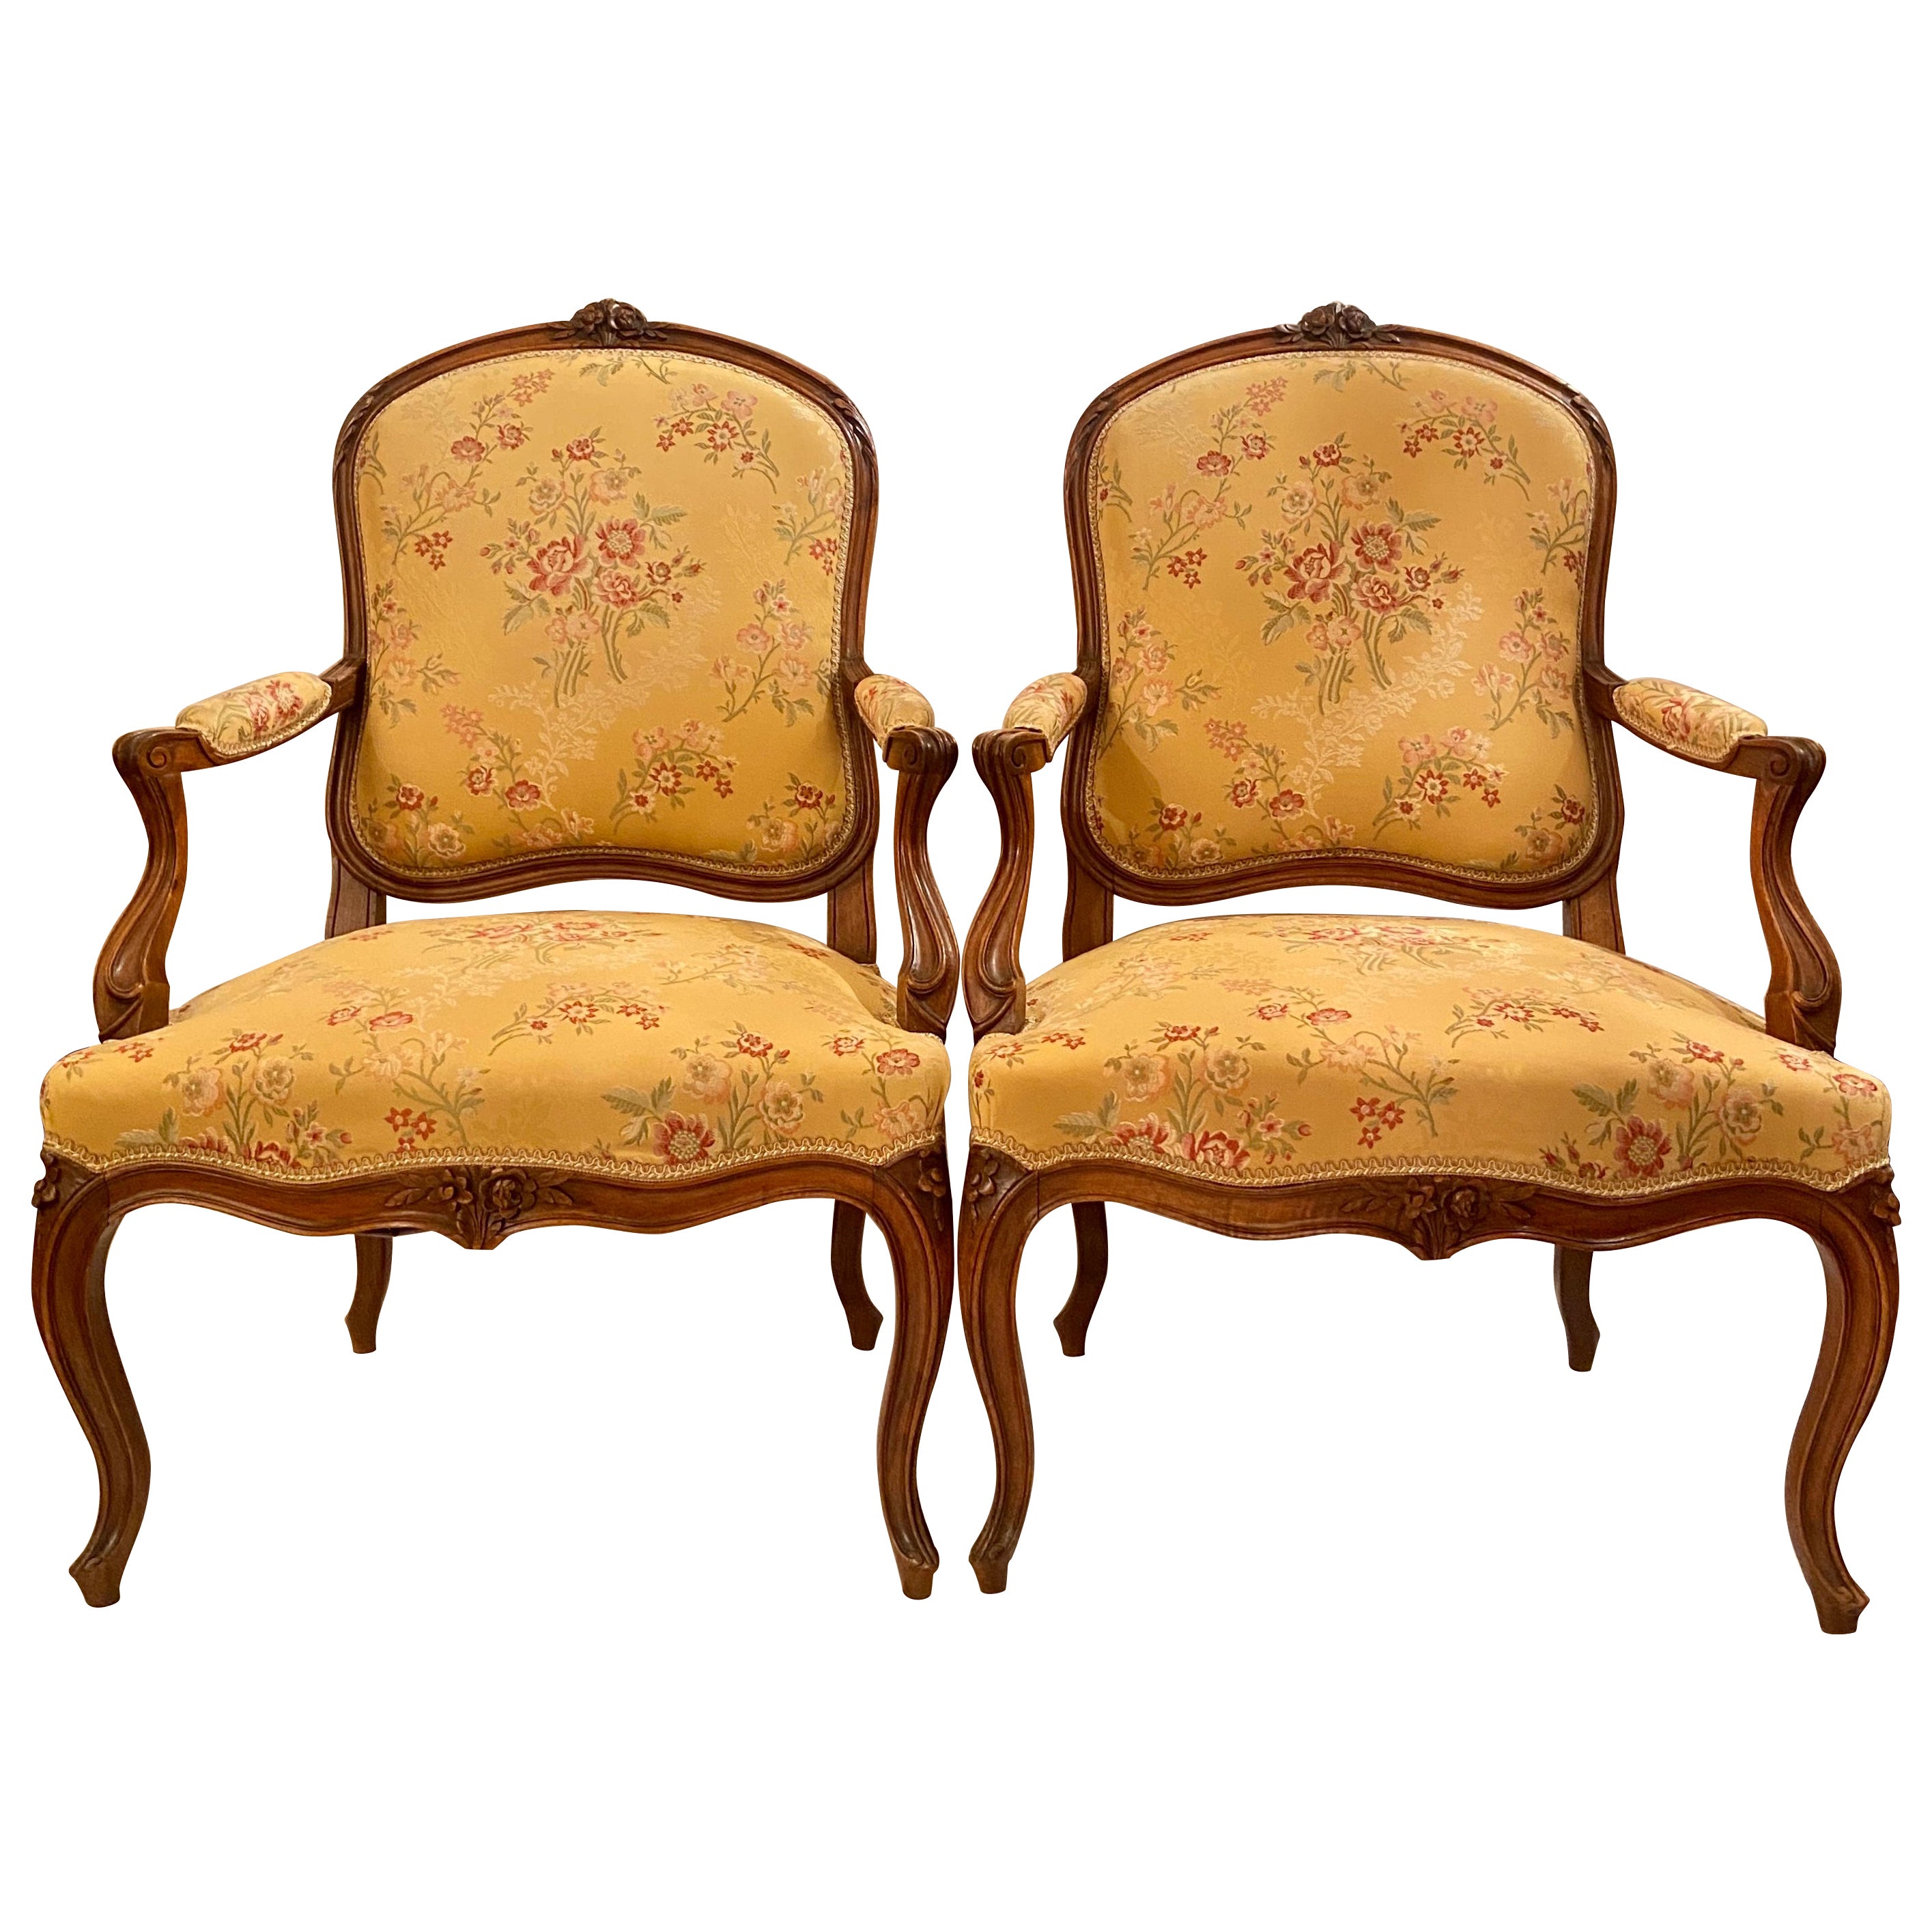 Pair Antique French Provincial Carved "Fauteuils" Armchairs, Circa 1880